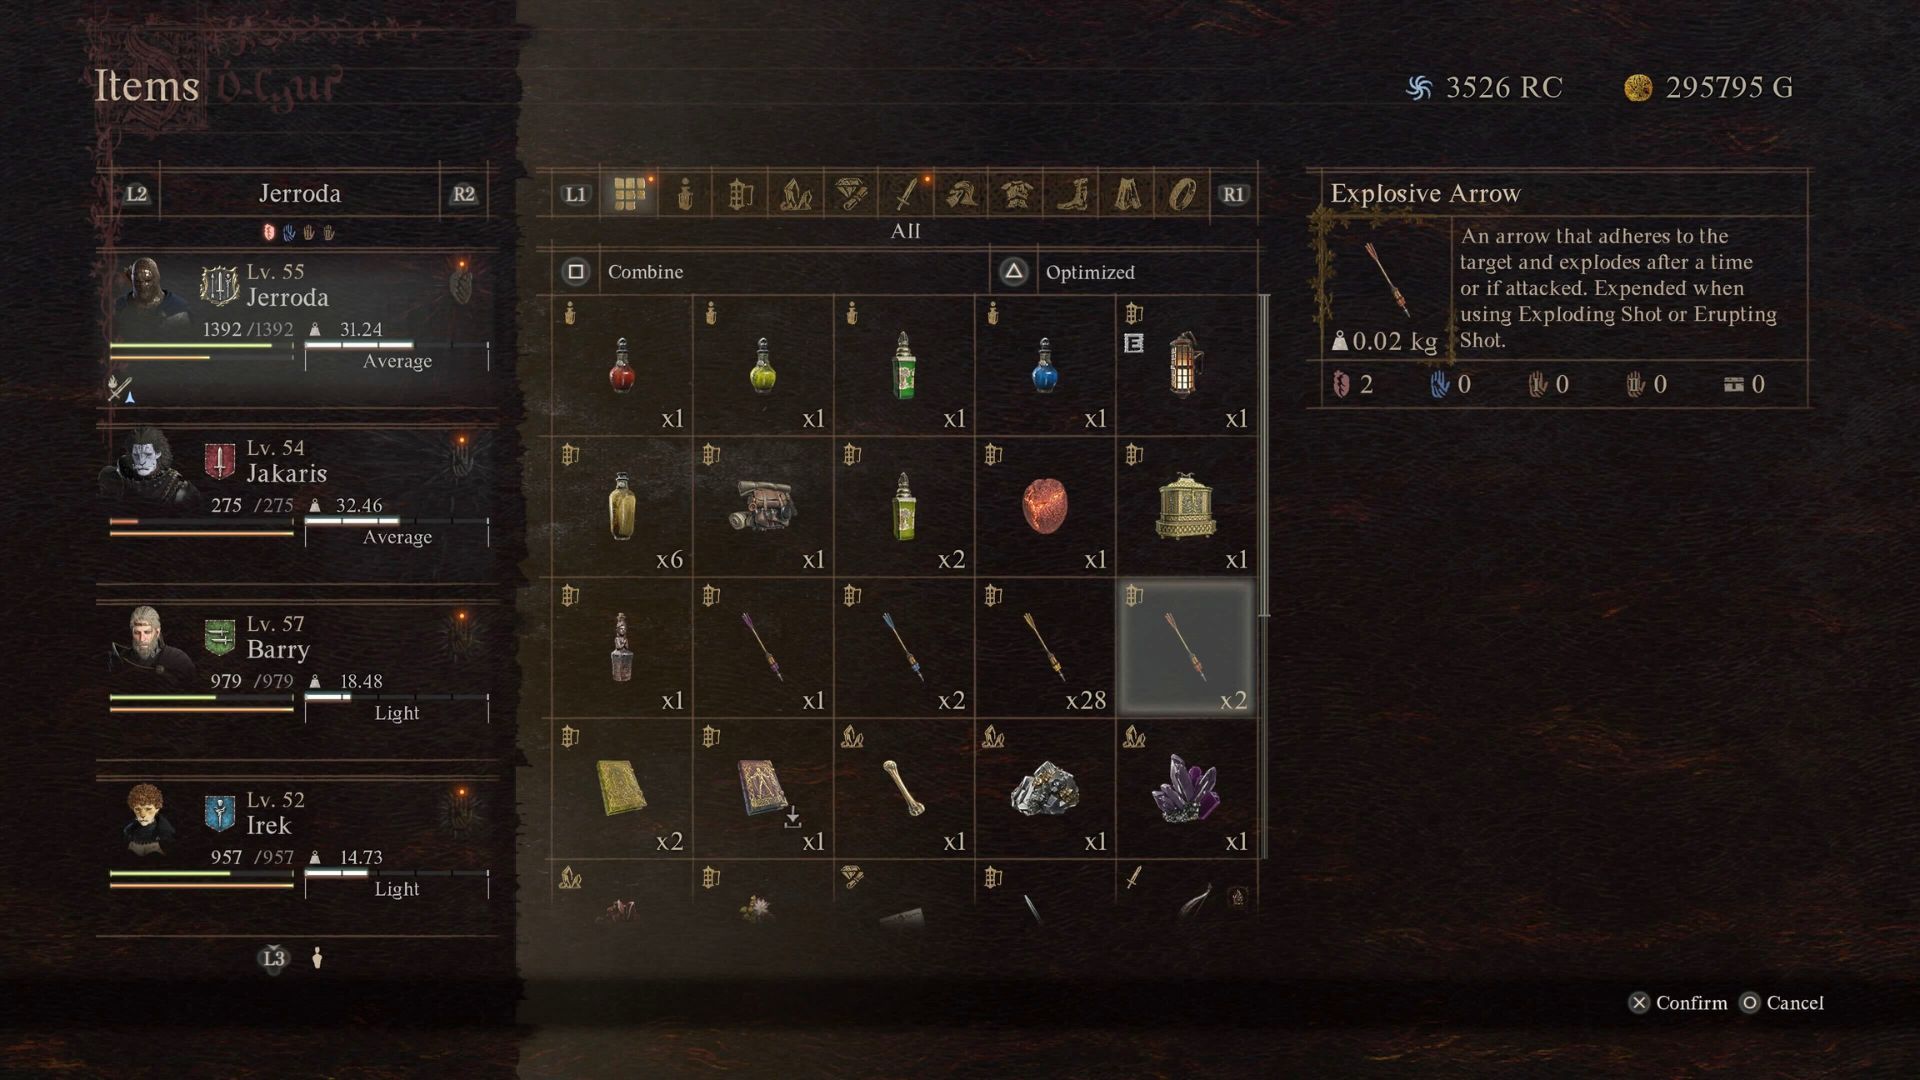 The Explosive Arrow as shown in the Dragon's Dogma 2 Items menu